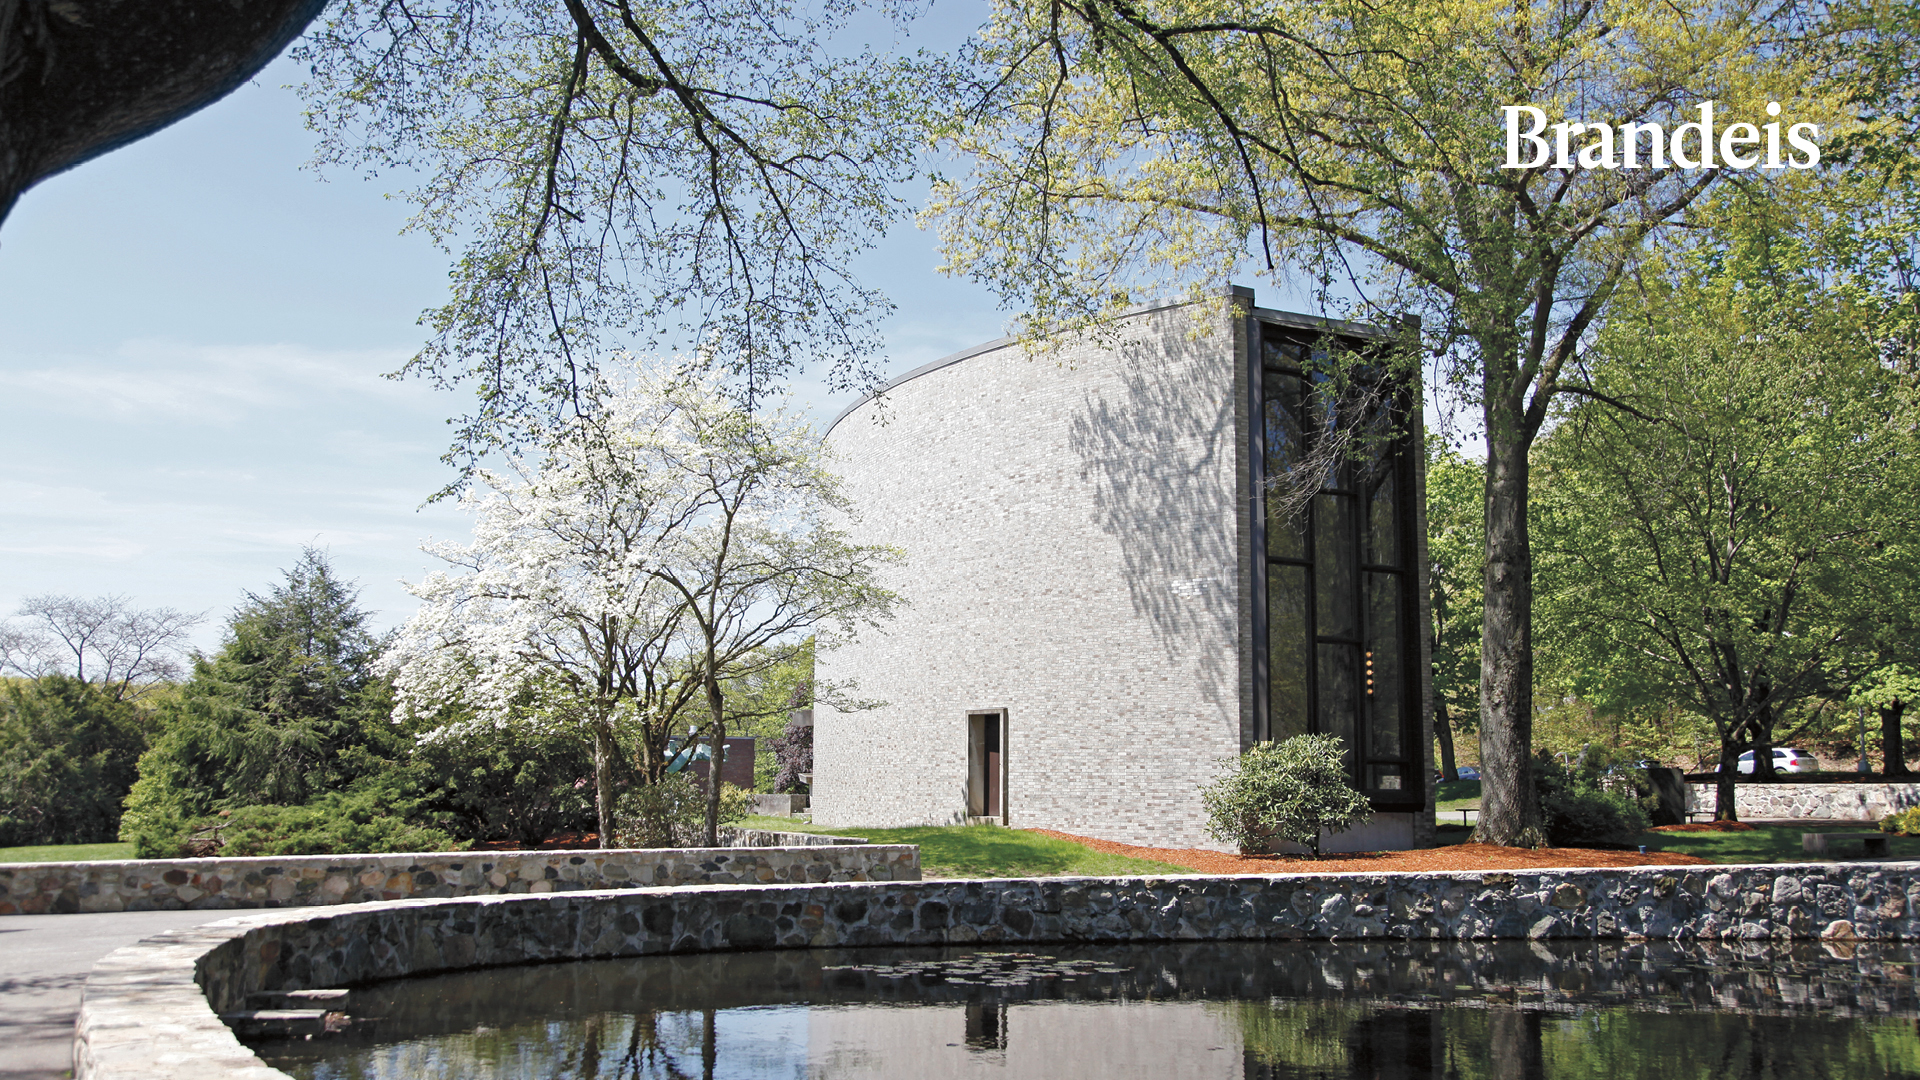 Pond and chapel with Brandeis logo